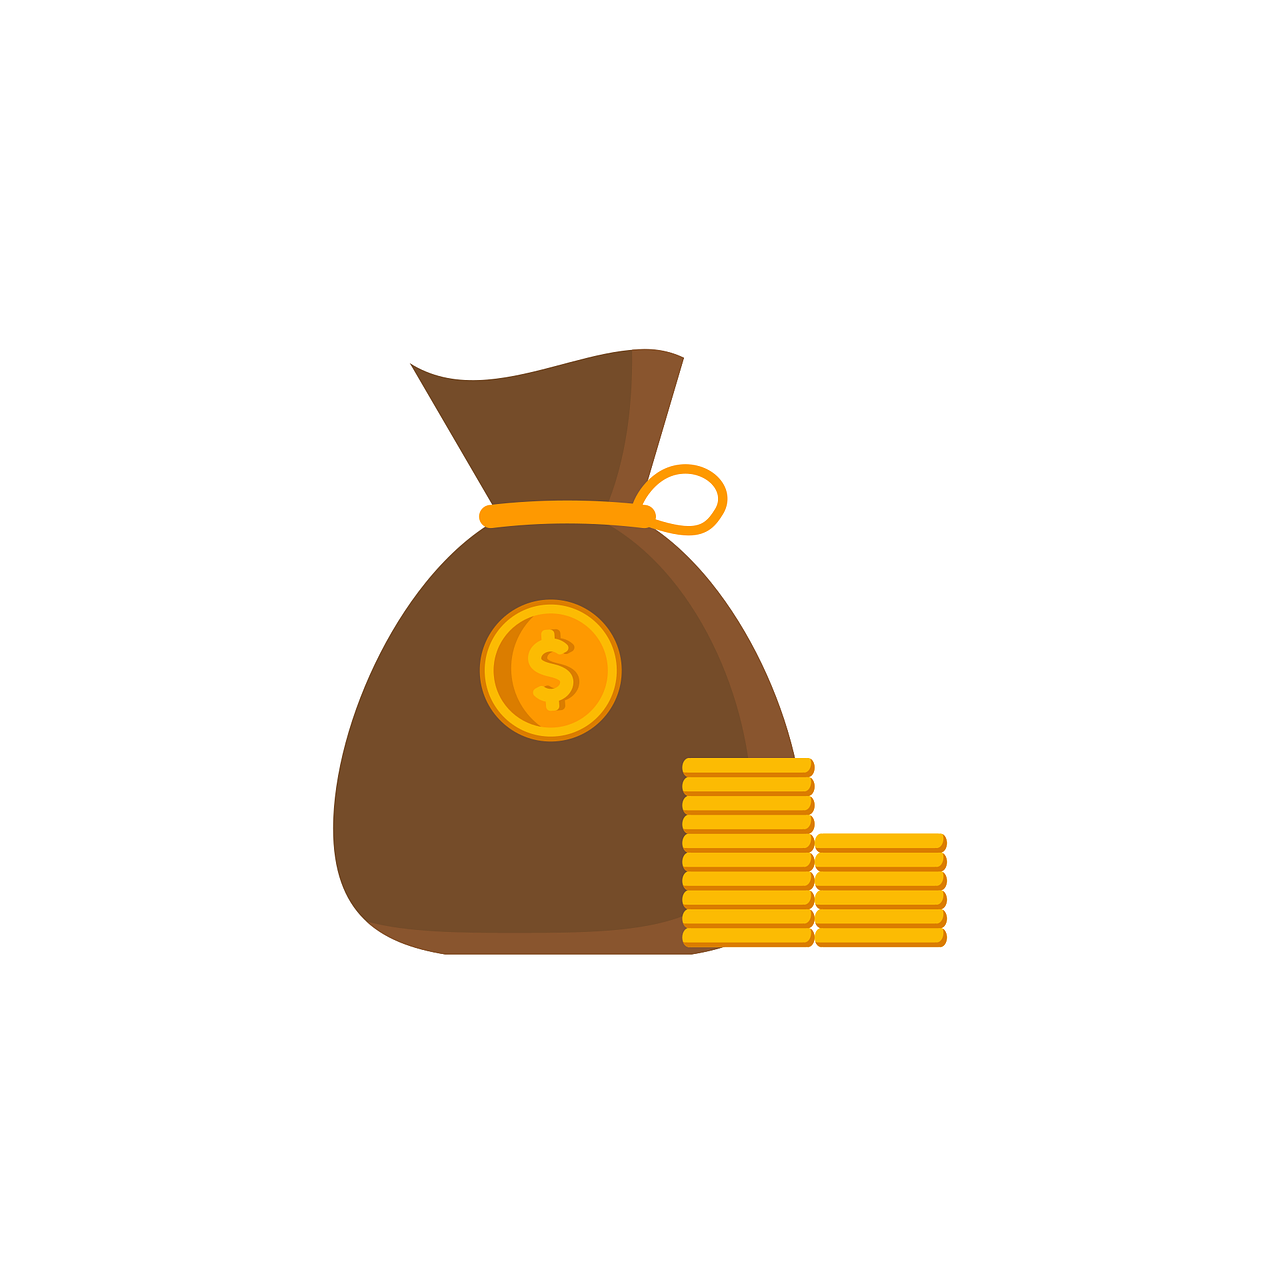 a bag of money and a stack of coins, an illustration of, minimalism, brown and gold, simple 2d flat design, courful illustration, on a white background